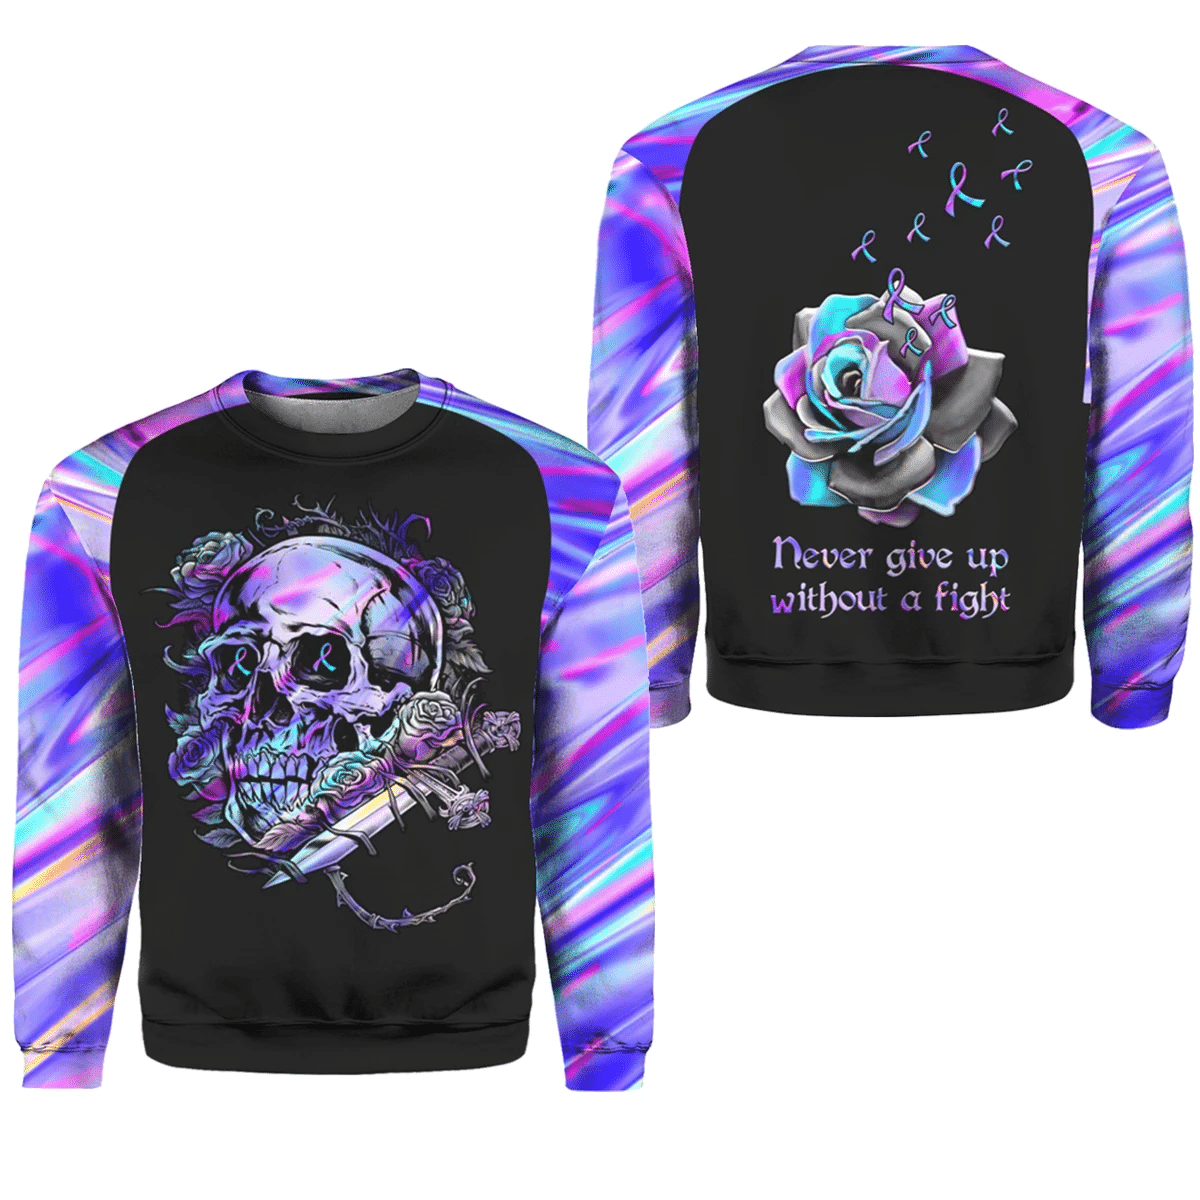 Suicide Awareness Rose, Never Give Up Without A Fight 3D Printed Shirt Style: 3D Sweatshirt, Color: Black